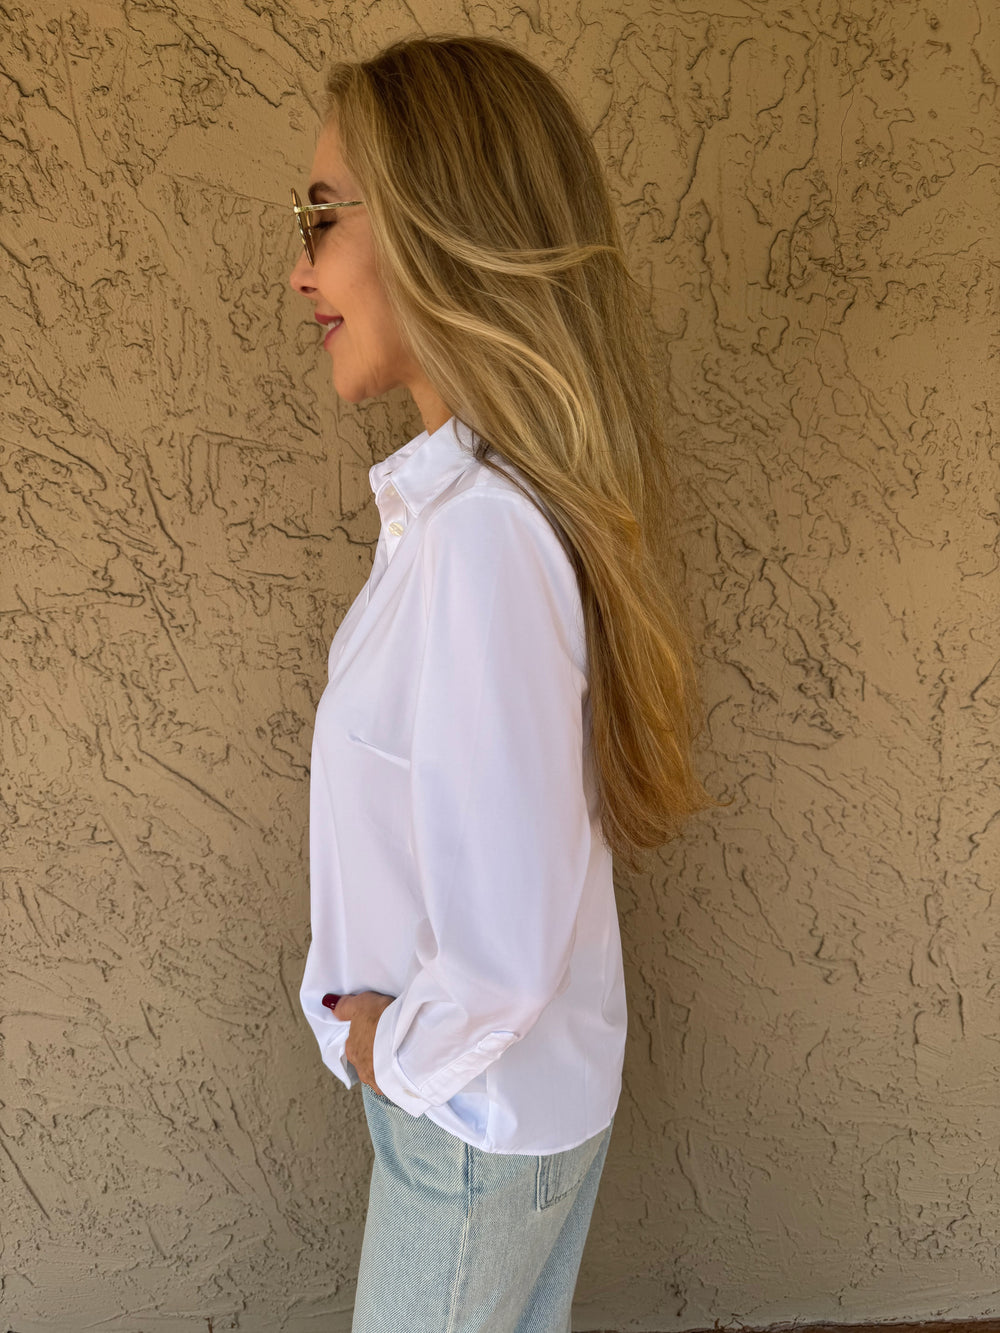 Ameliora Diane 3/4 Sleeve Shirt in White - Side View